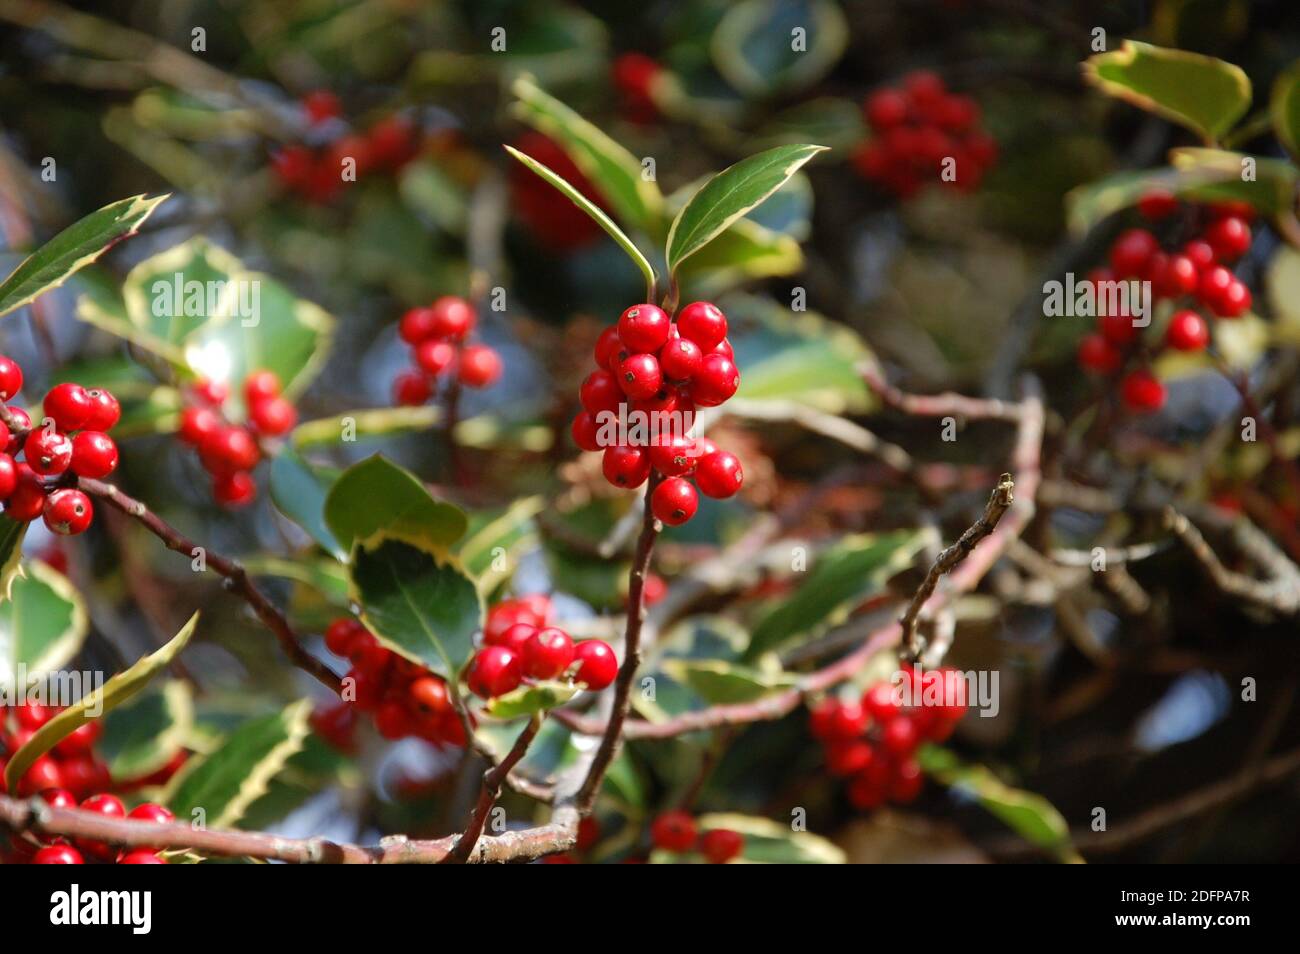 Bright green Christmas holly with red berries isolated on white